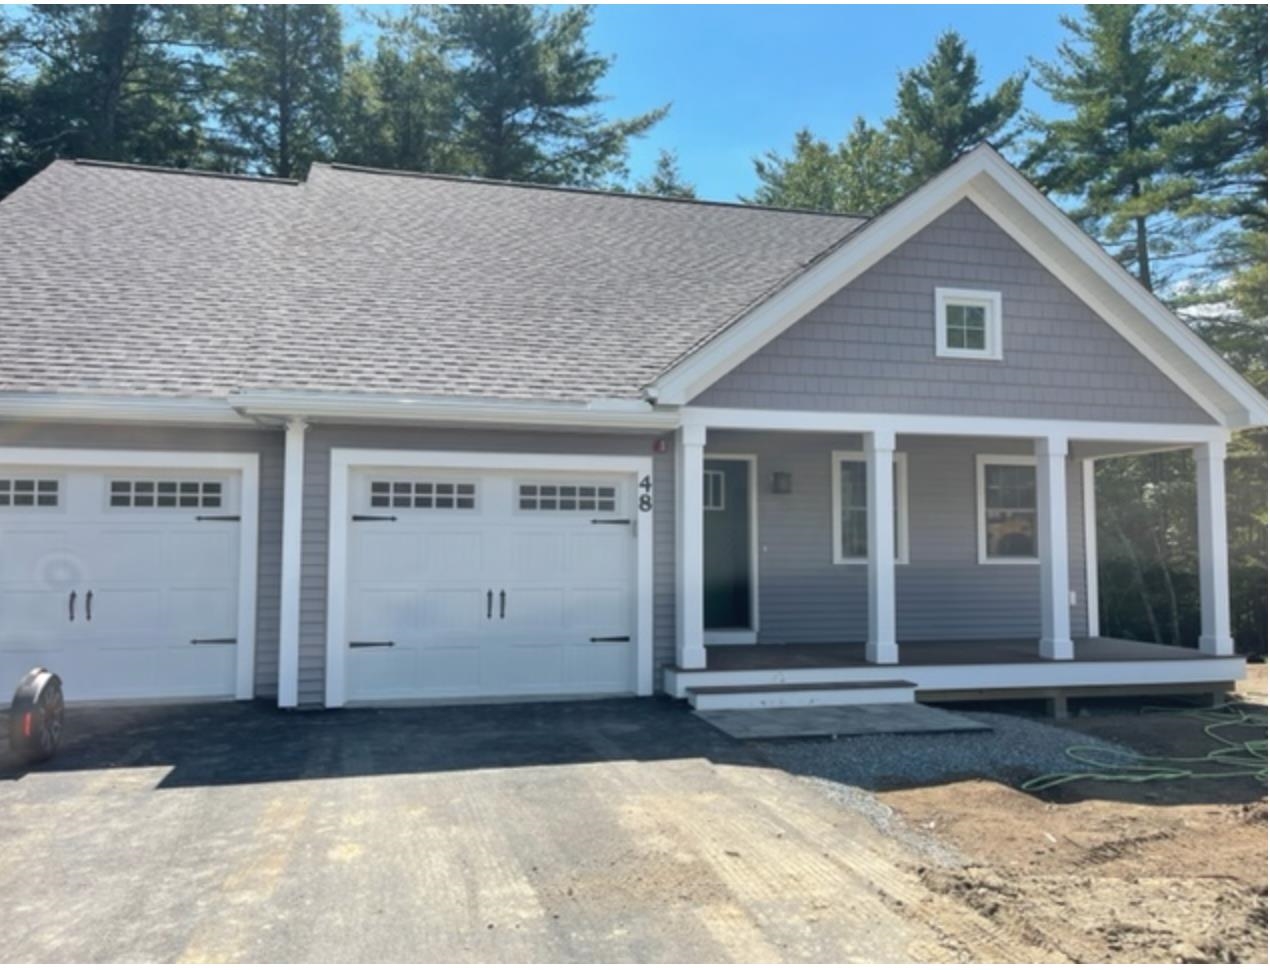 48 Three Ponds Drive, Brentwood, NH 03833